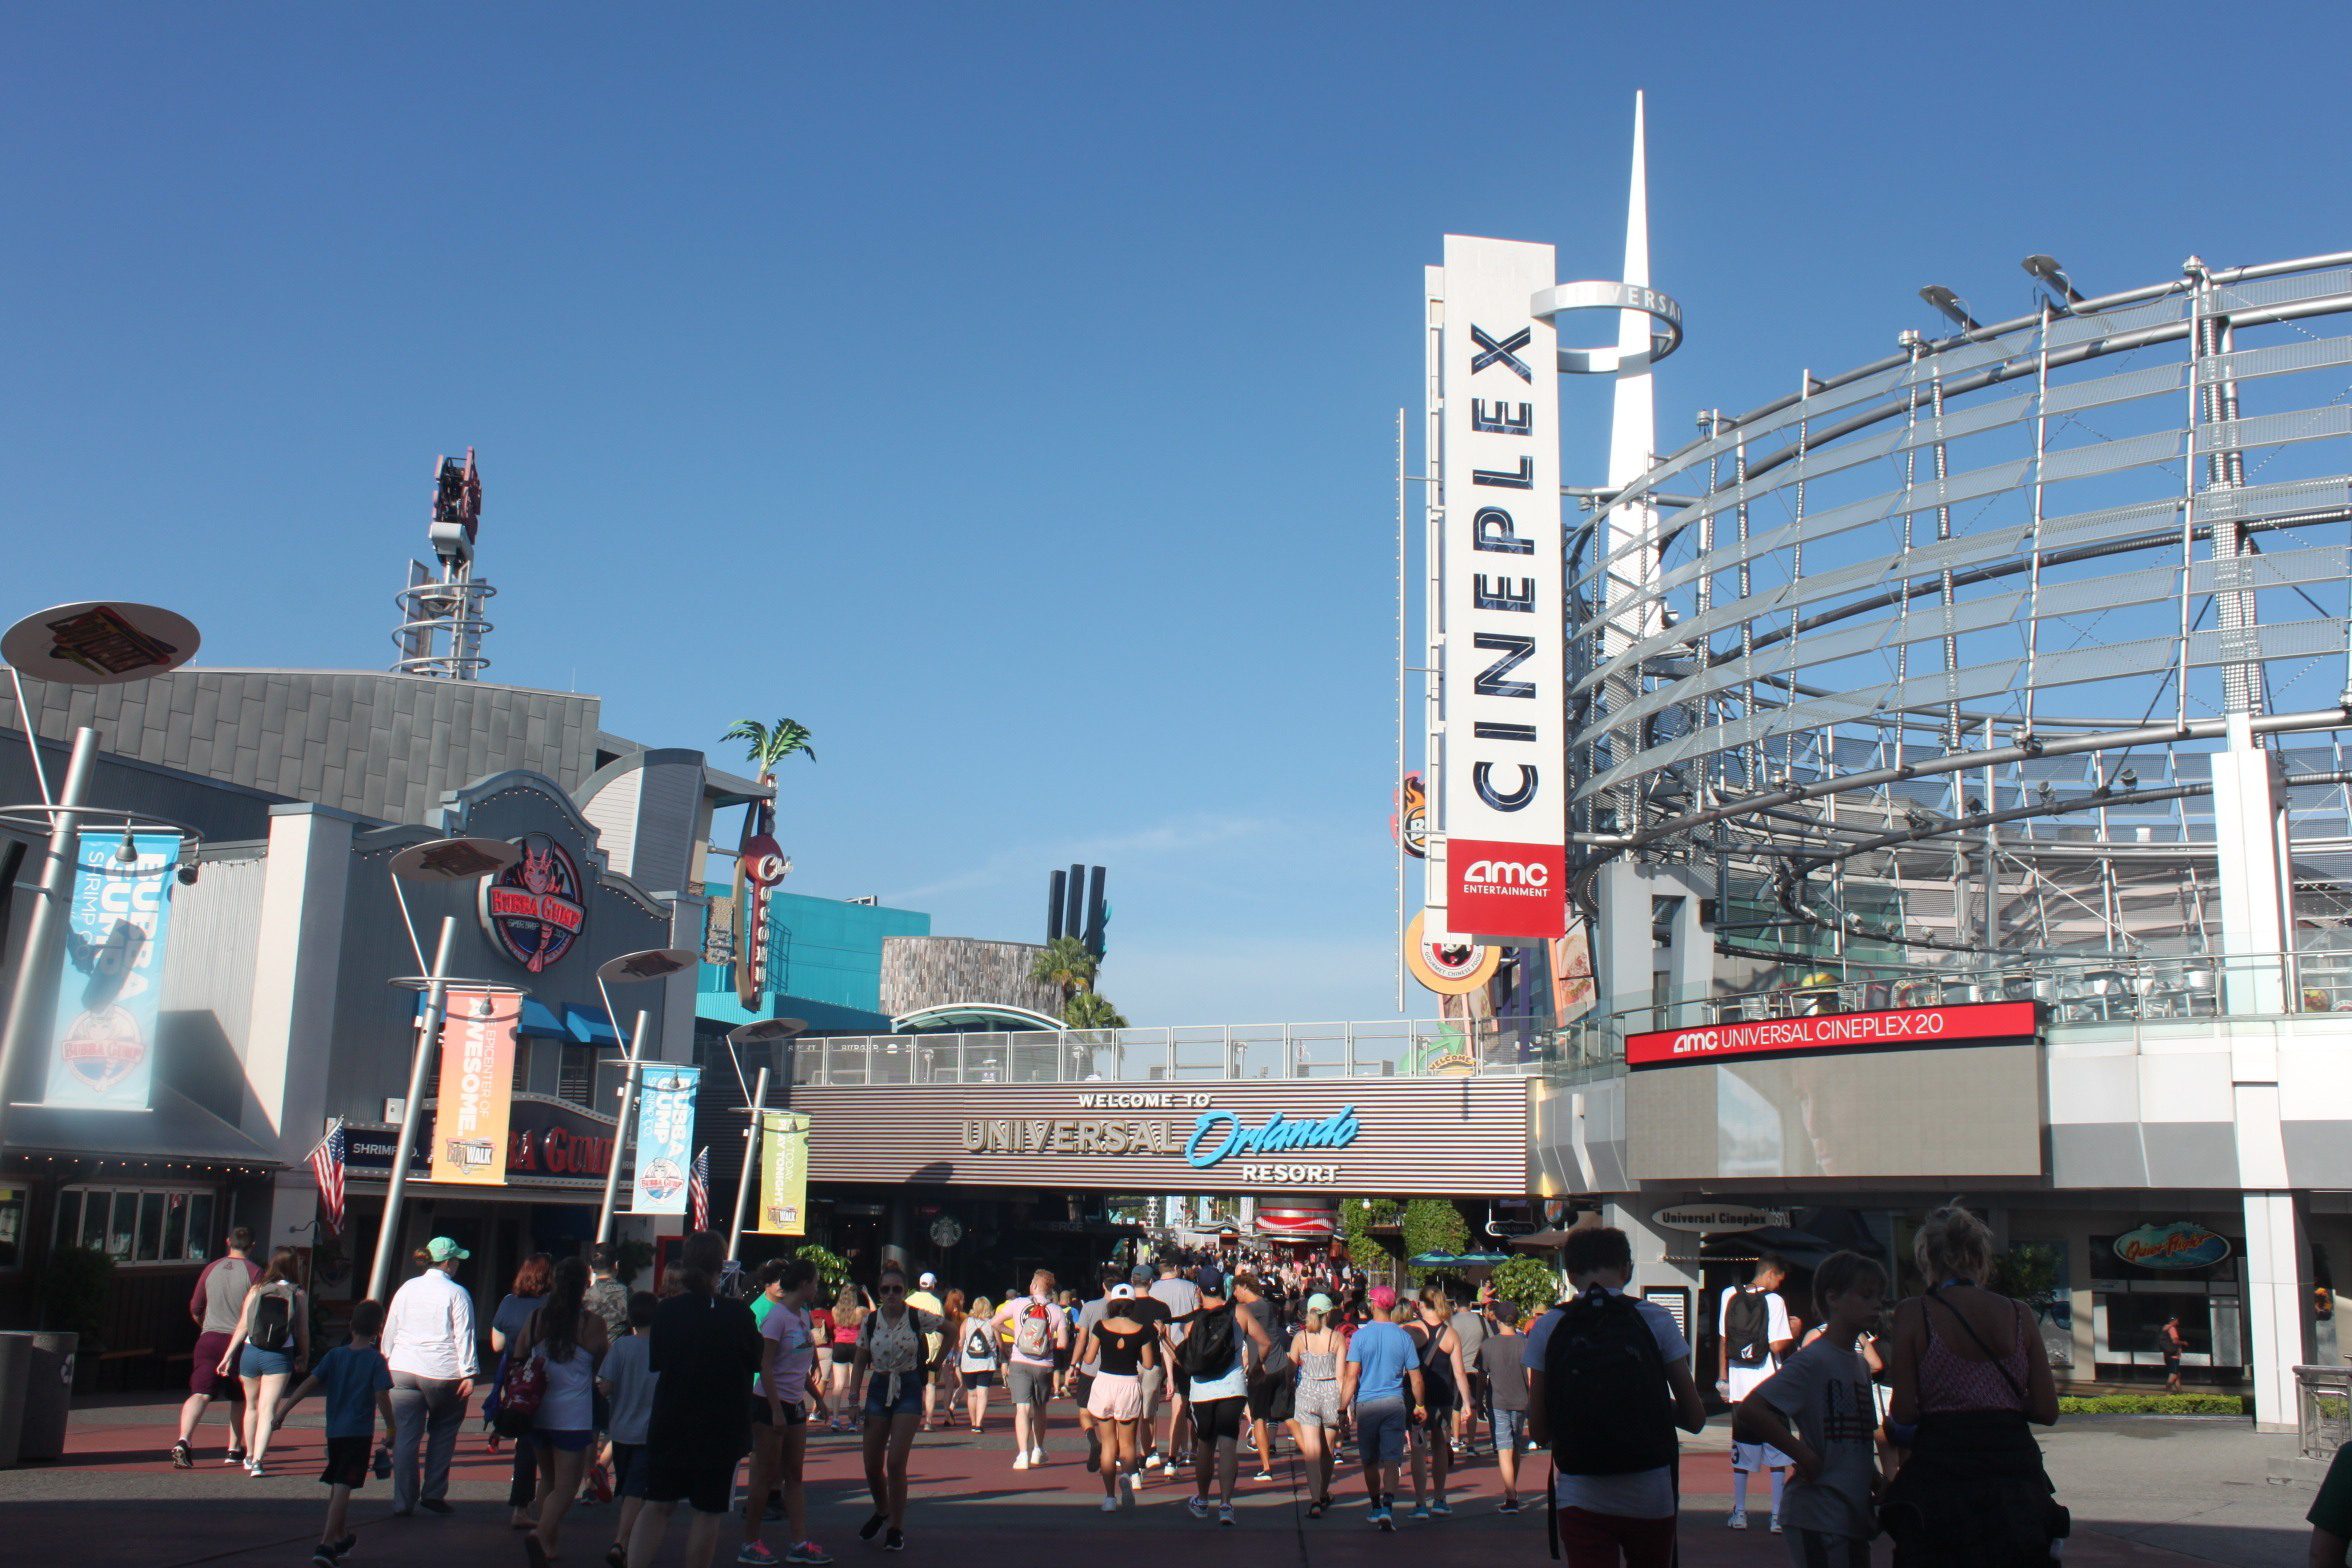 Universal CityWalk Rising Star is one of the very best things to